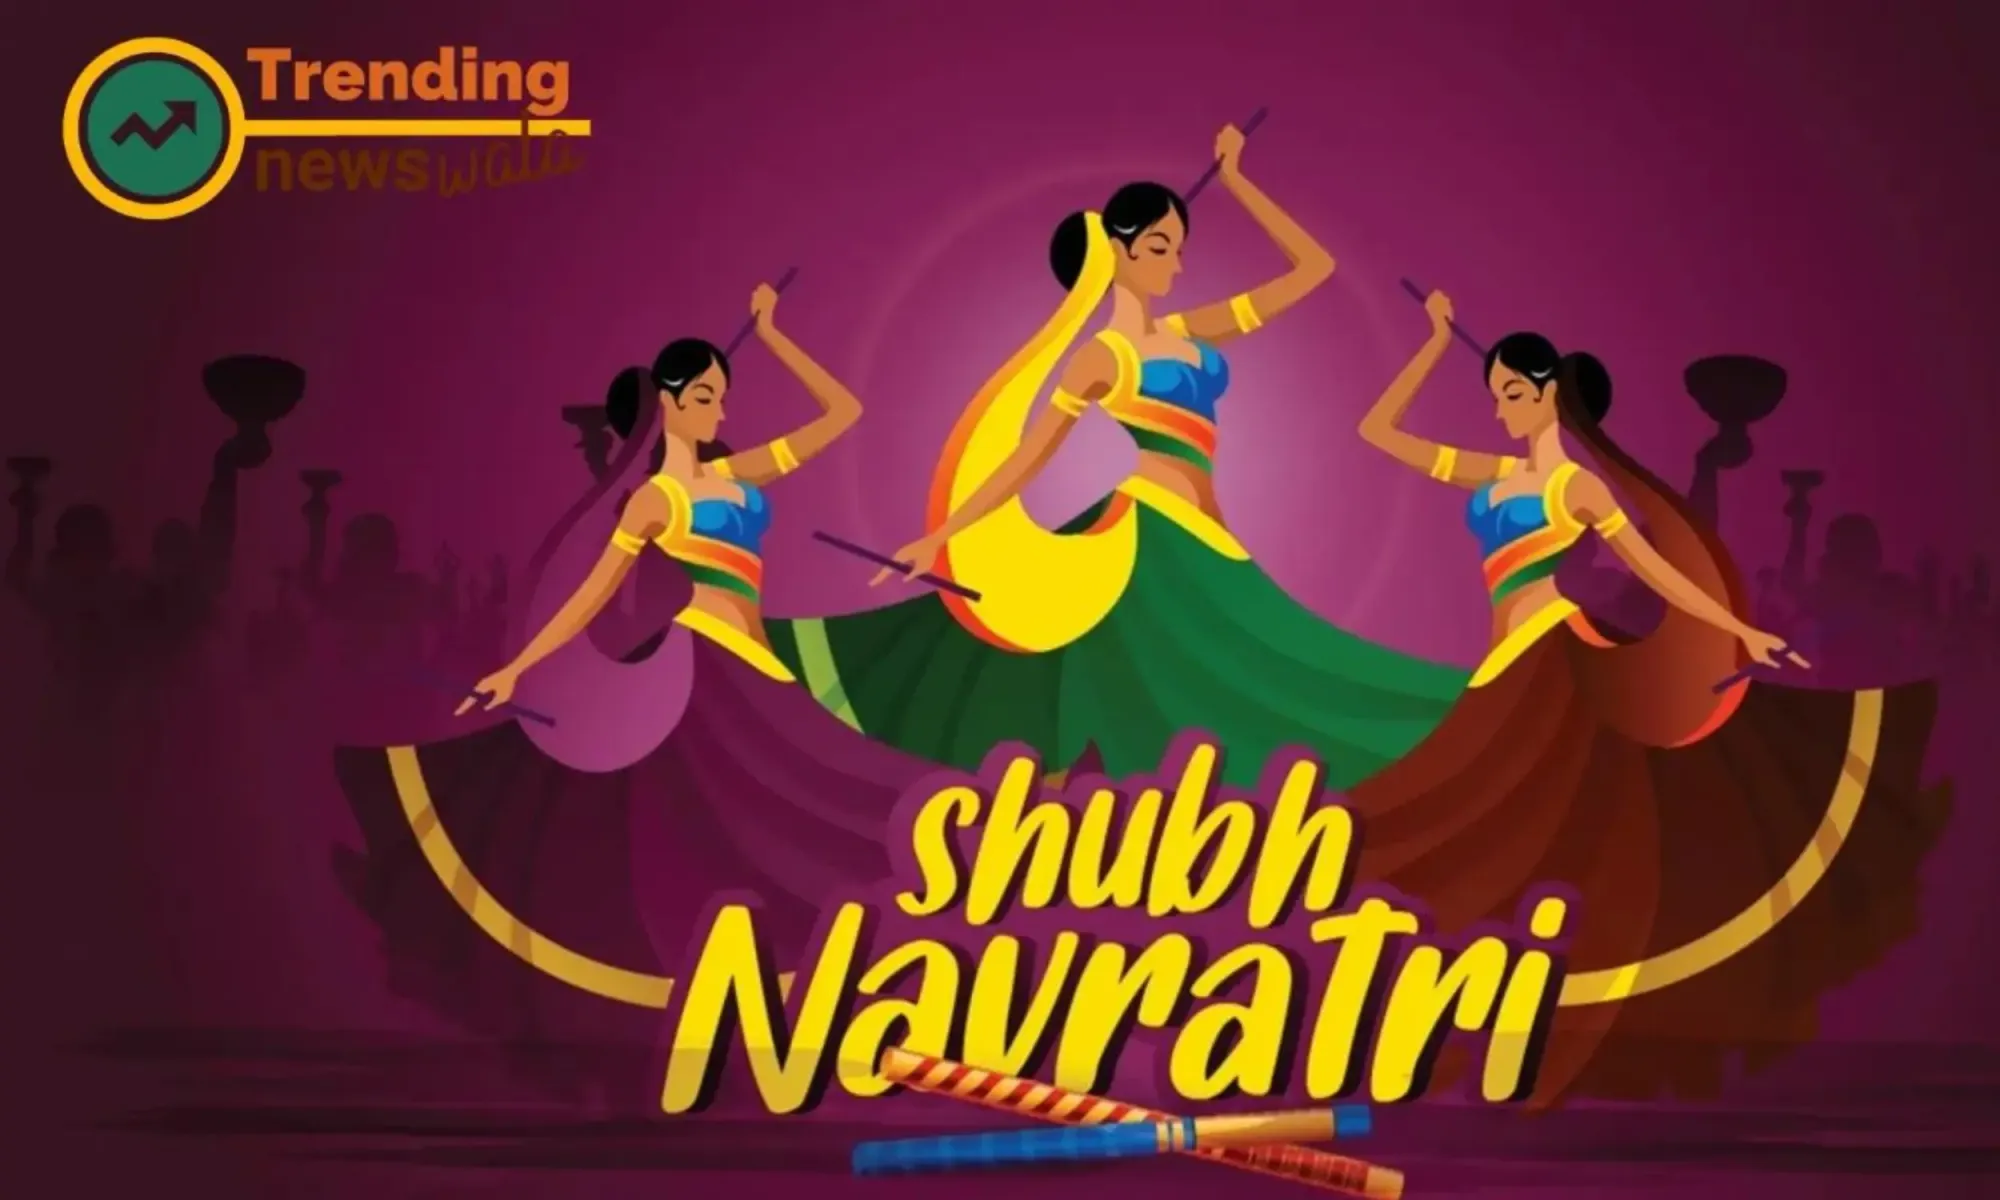 Navaratri, also known as Navratri, is a vibrant Hindu festival celebrated with great fervor